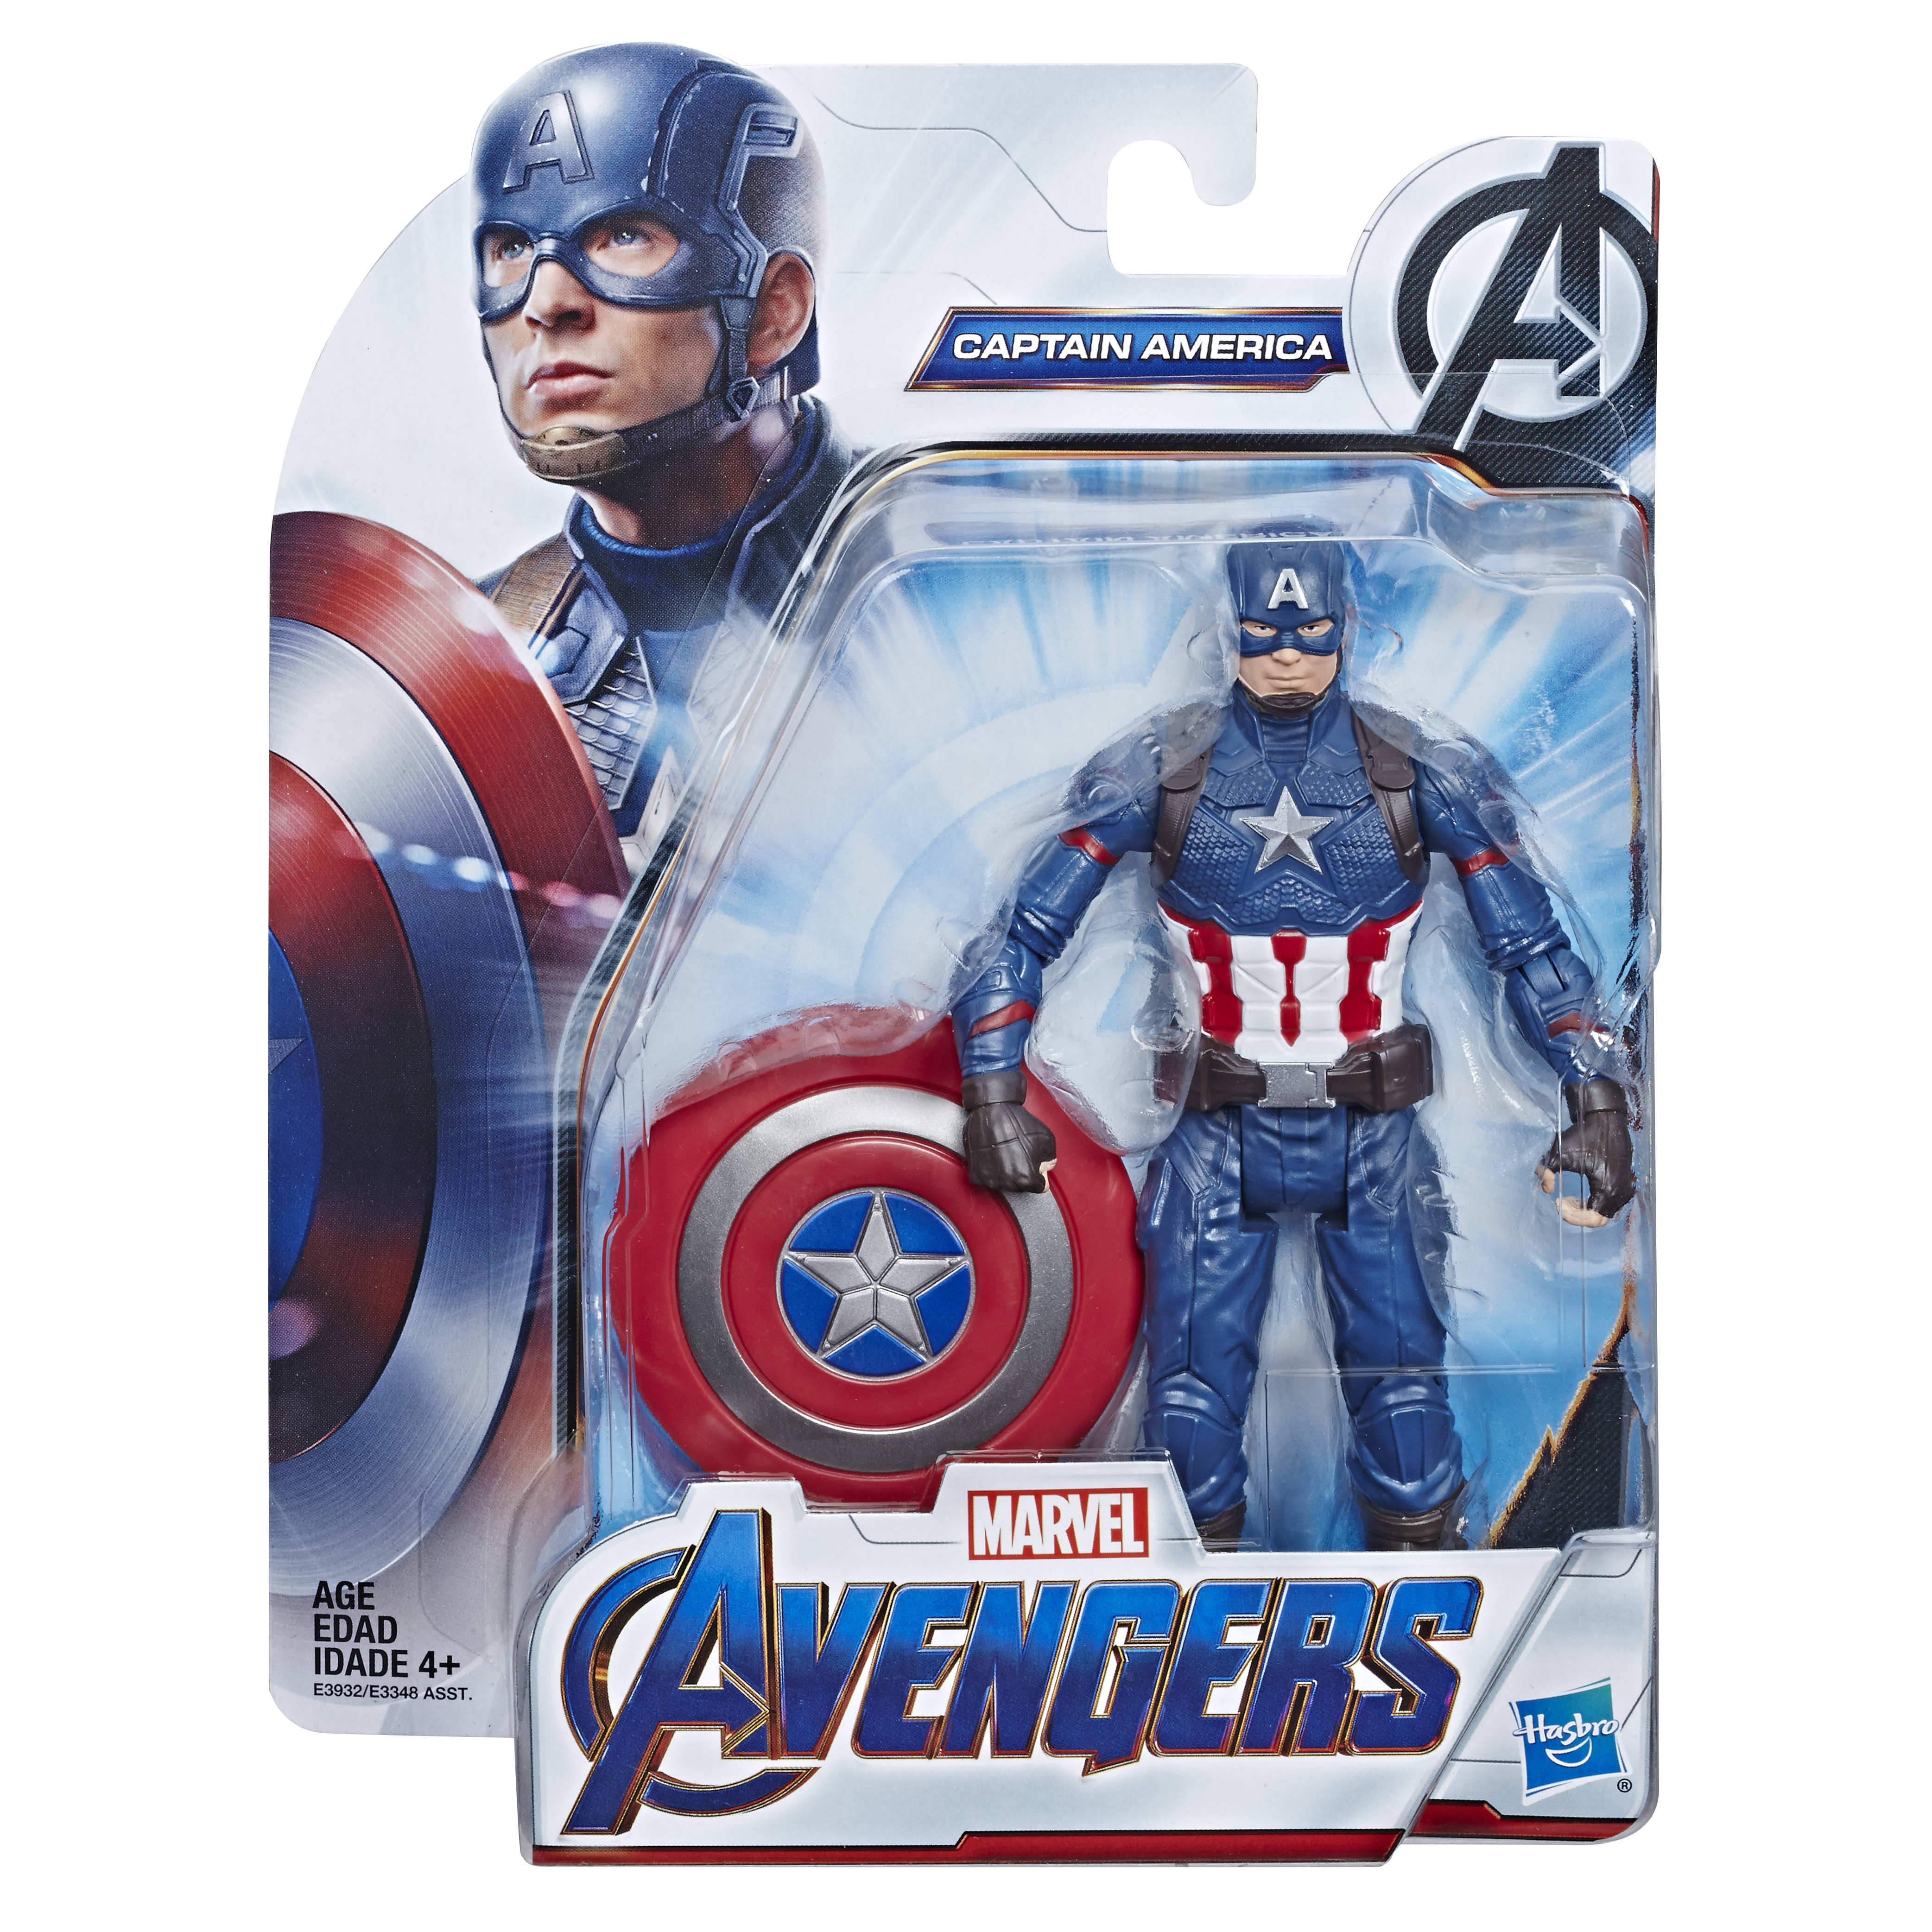 6-inch Captain America carded